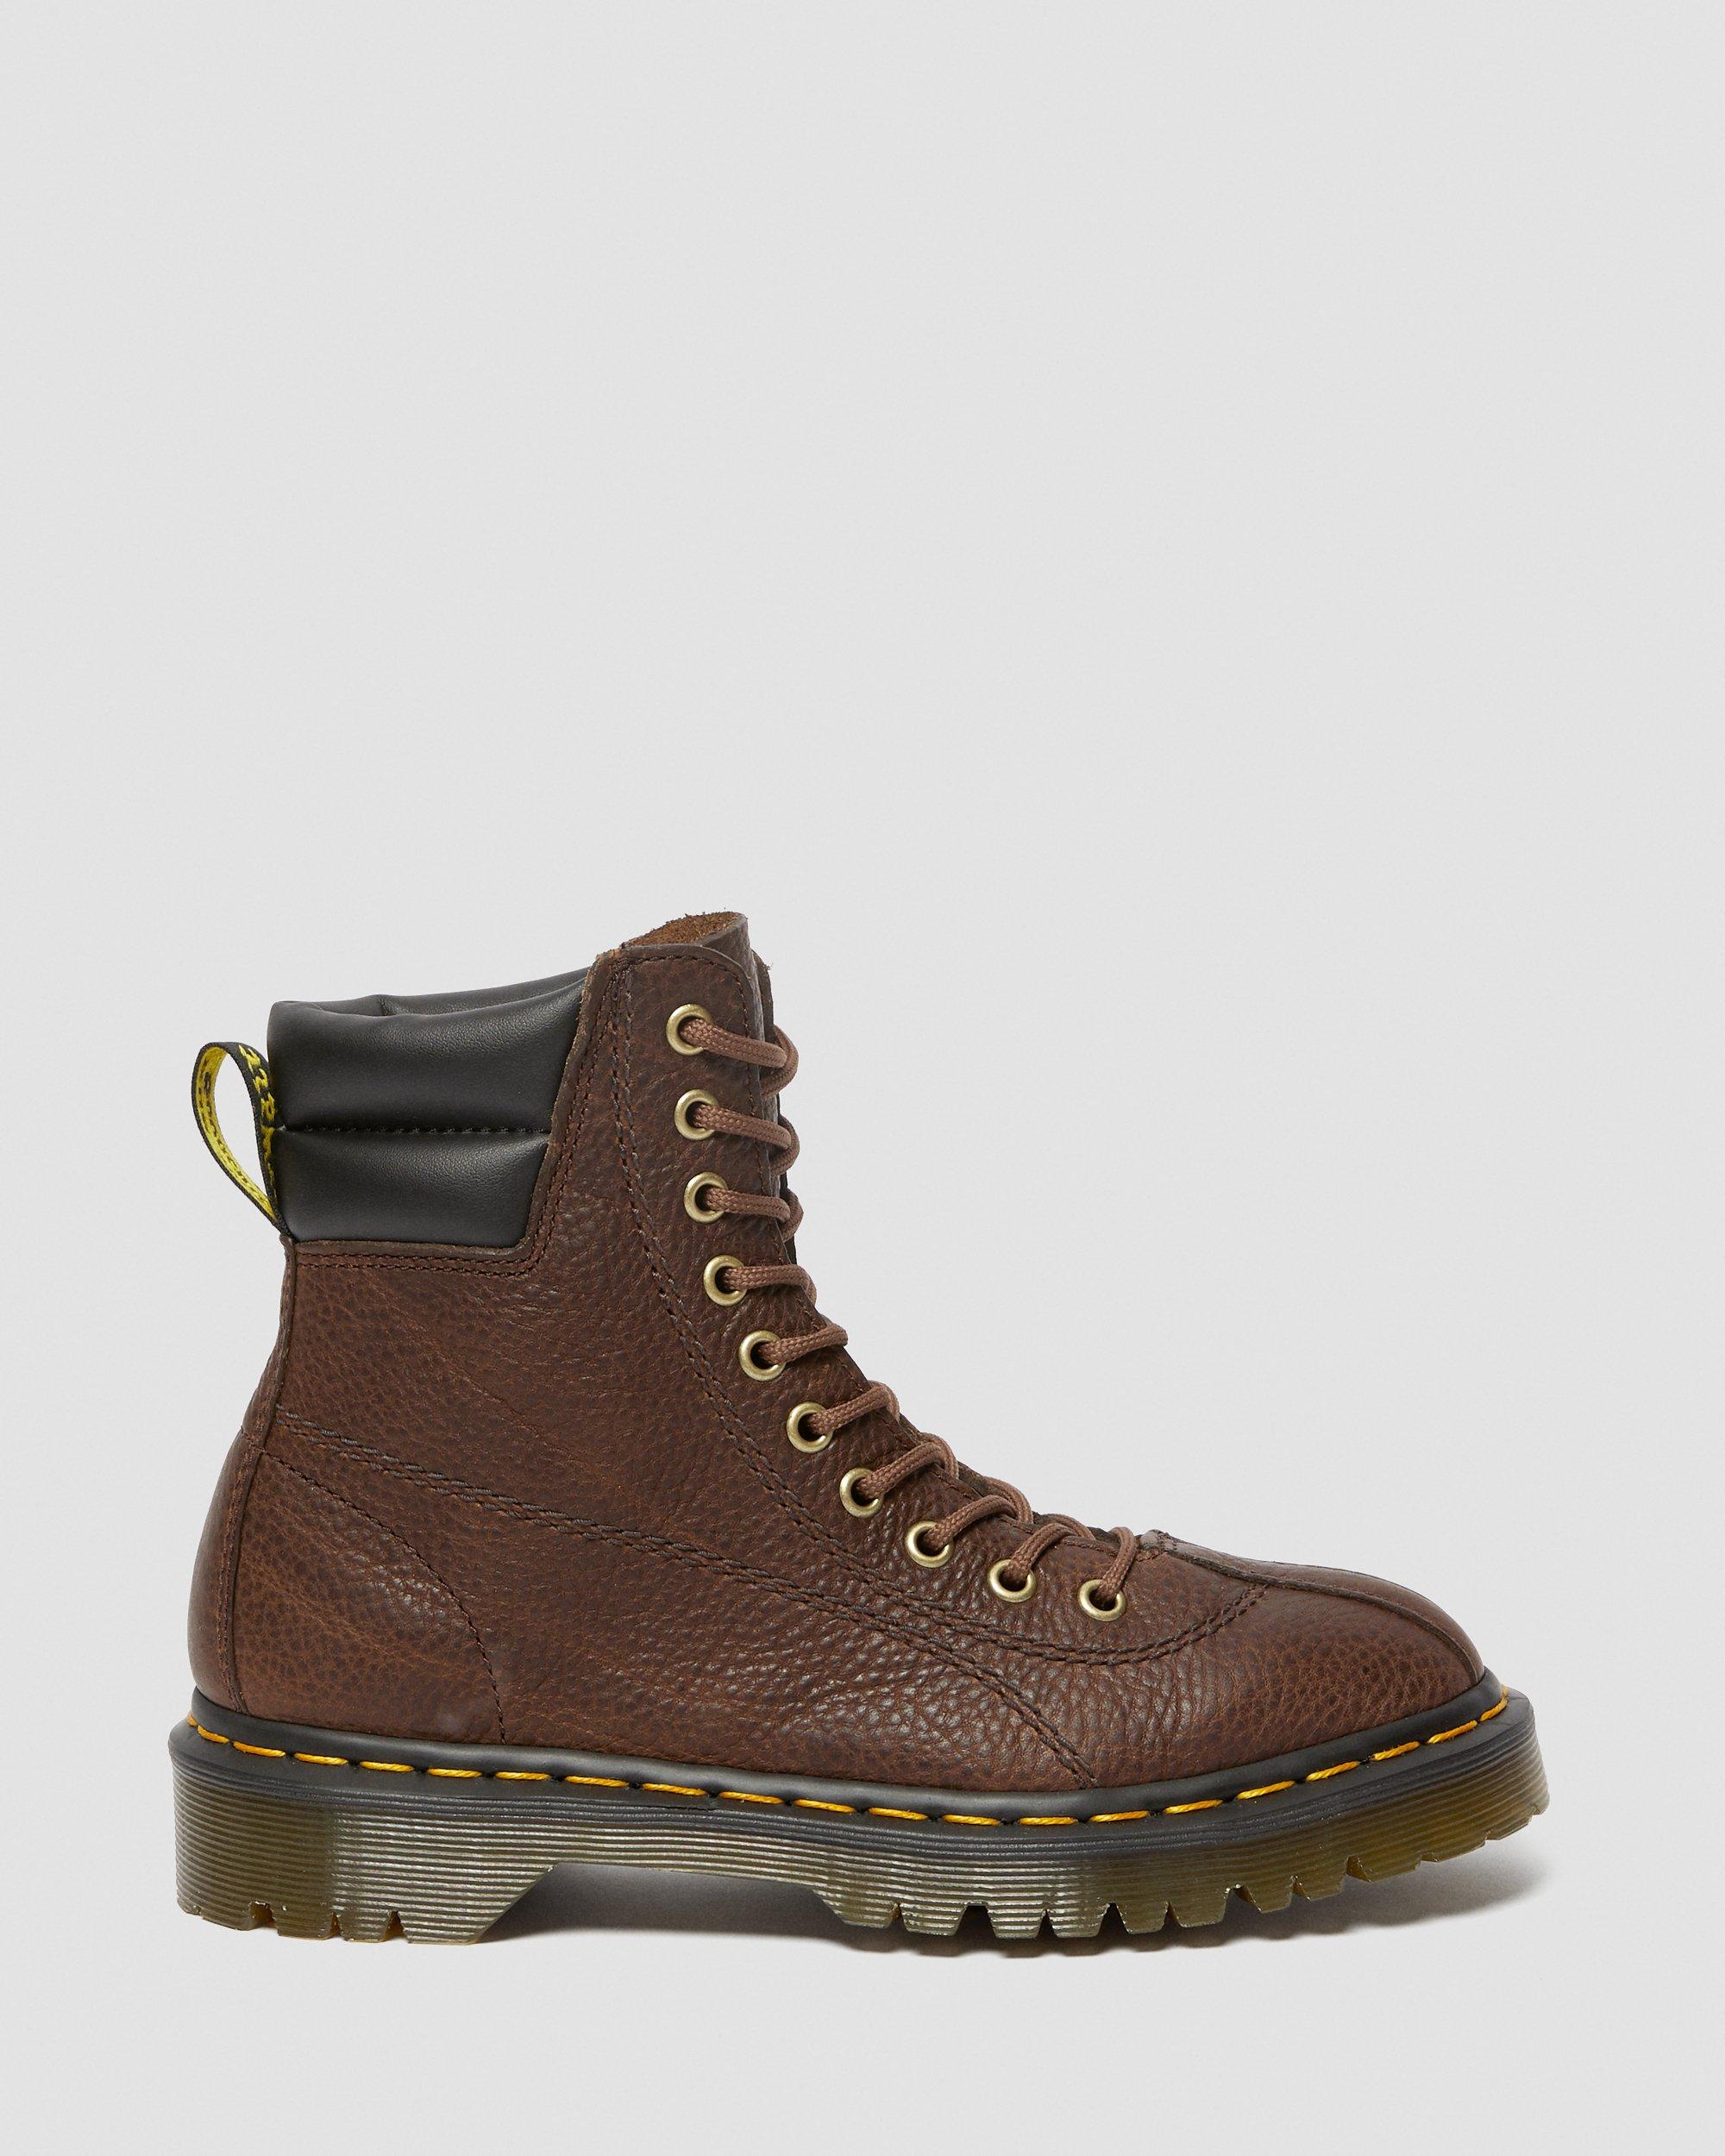 SANTO GRIZZLY | Dr. Martens Official